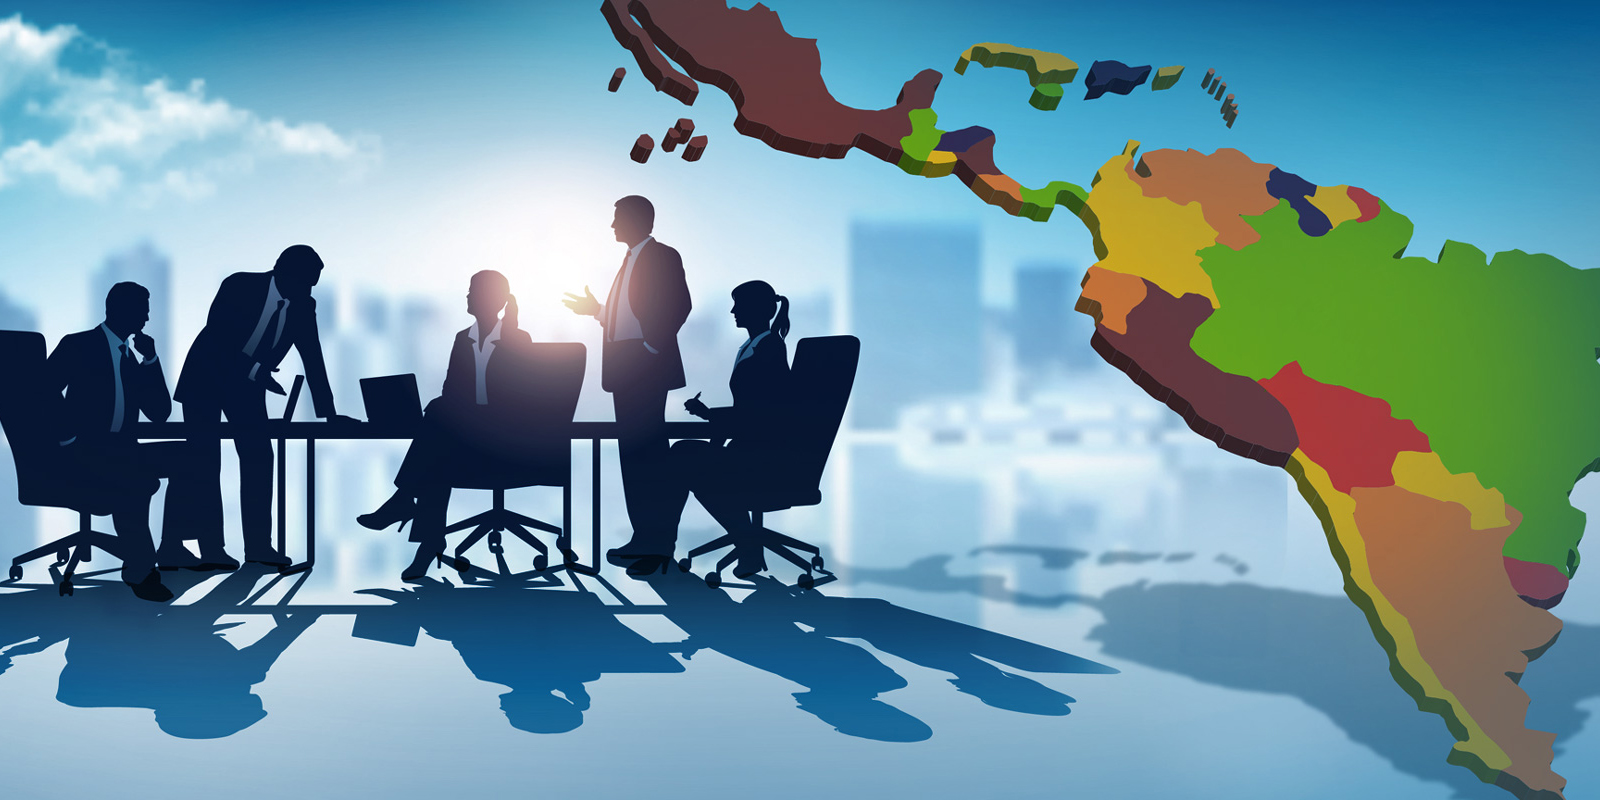 Investment Arbitration in Latin America: Elections, Trade Agreements, and the ICSID